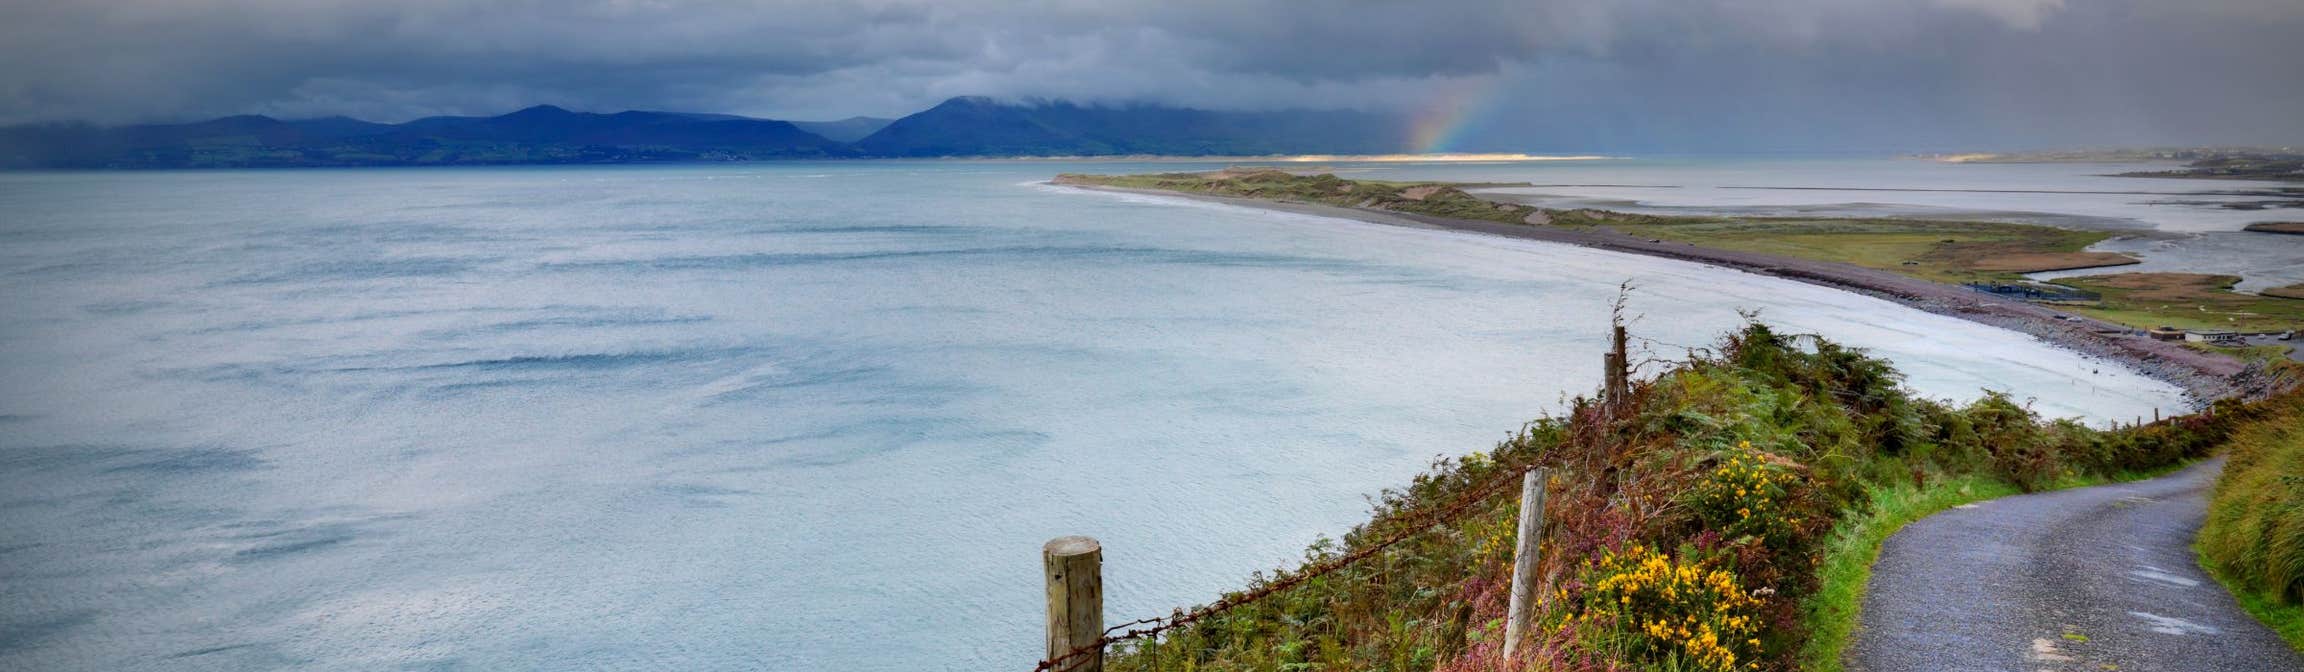 View of the sand spit at Rossbeigh Strand, County Kerry